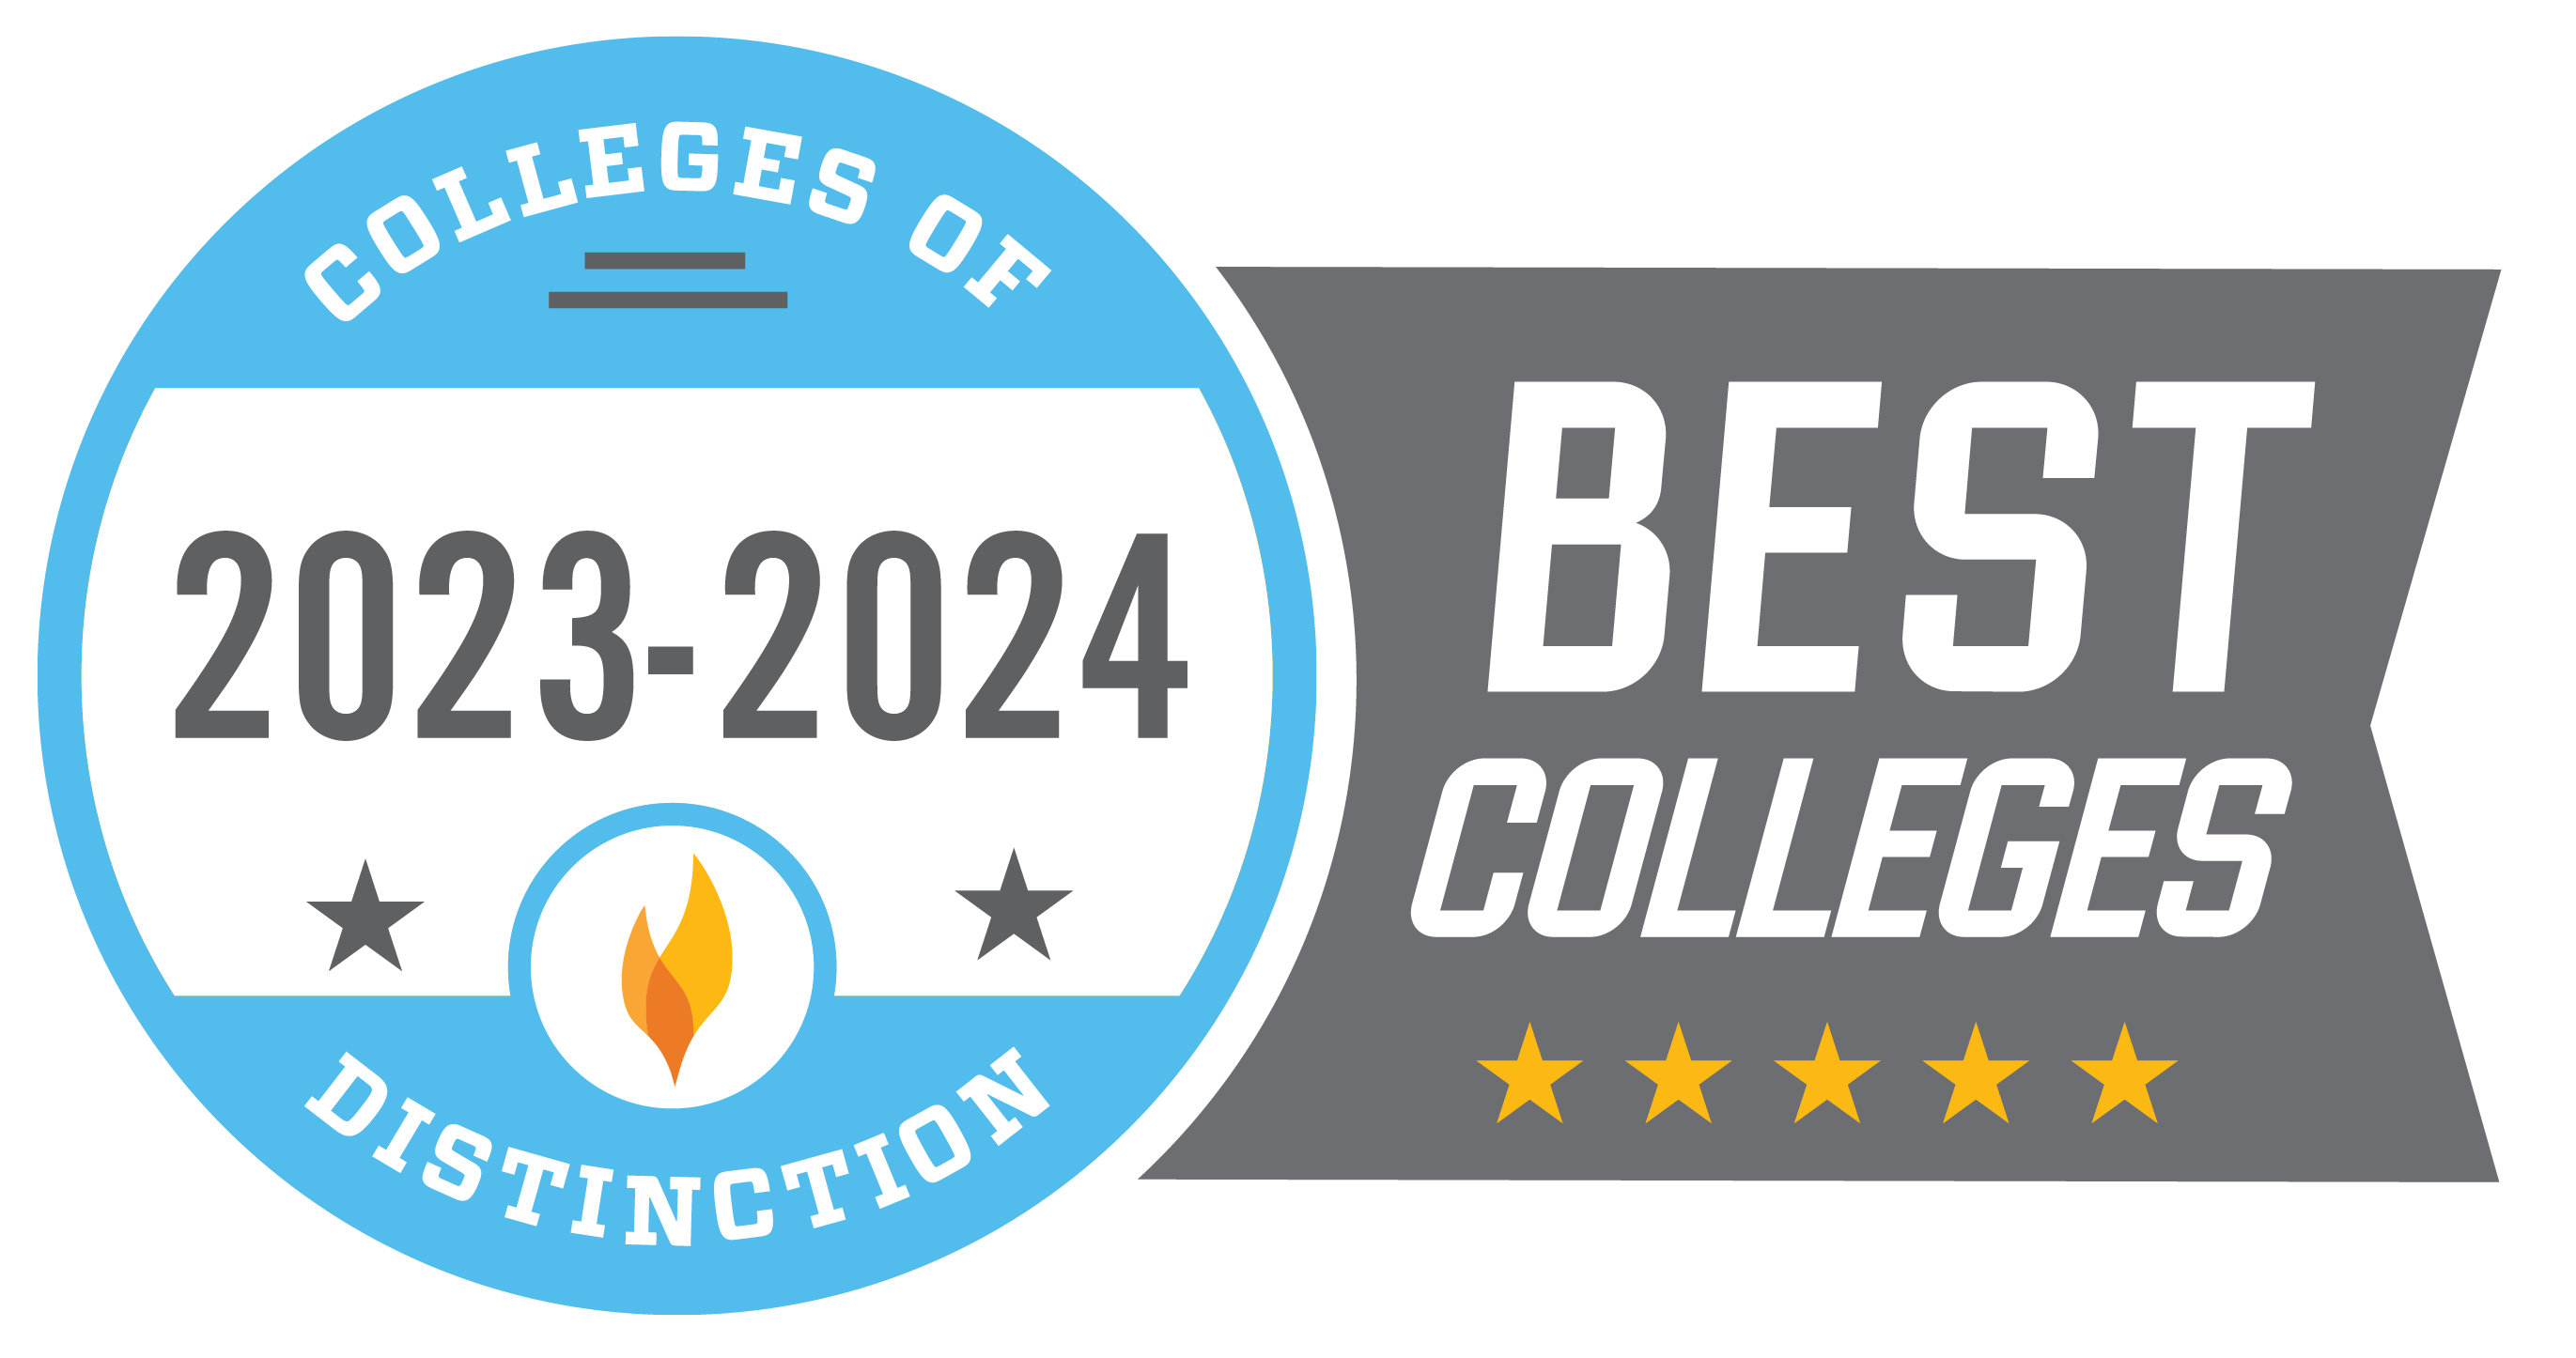 Colleges of Distinction 2022-2023 badge